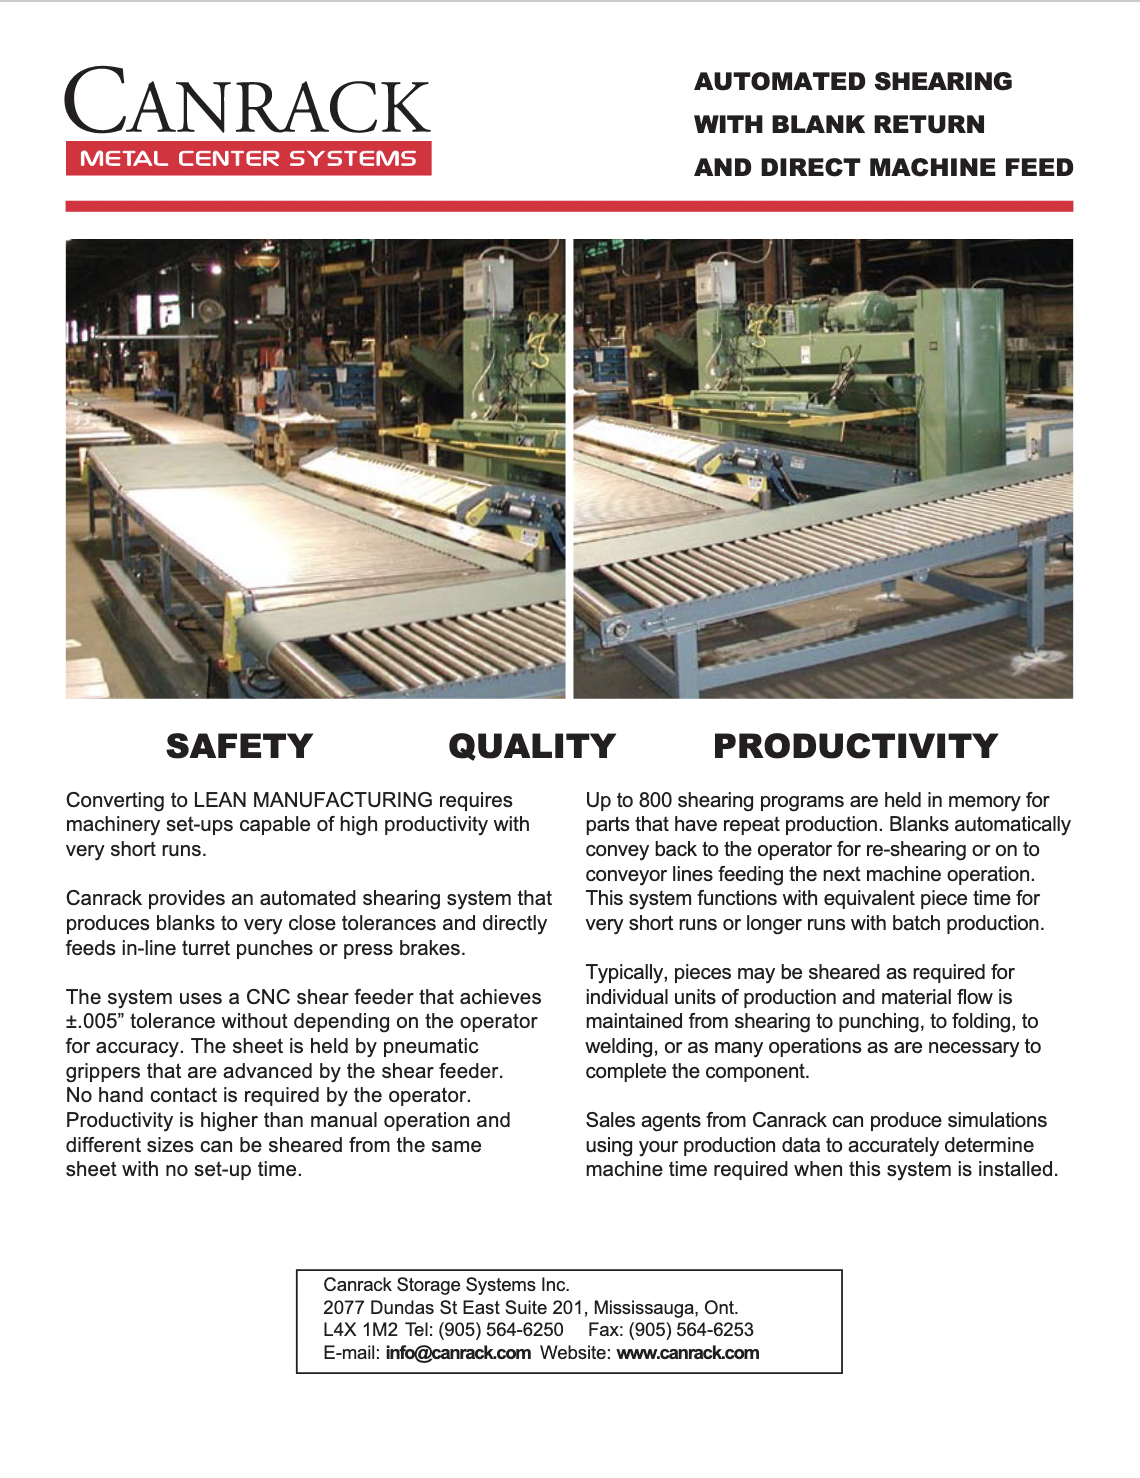 Automated Shearing with Blank Return and Direct Machine Feed Info Sheet